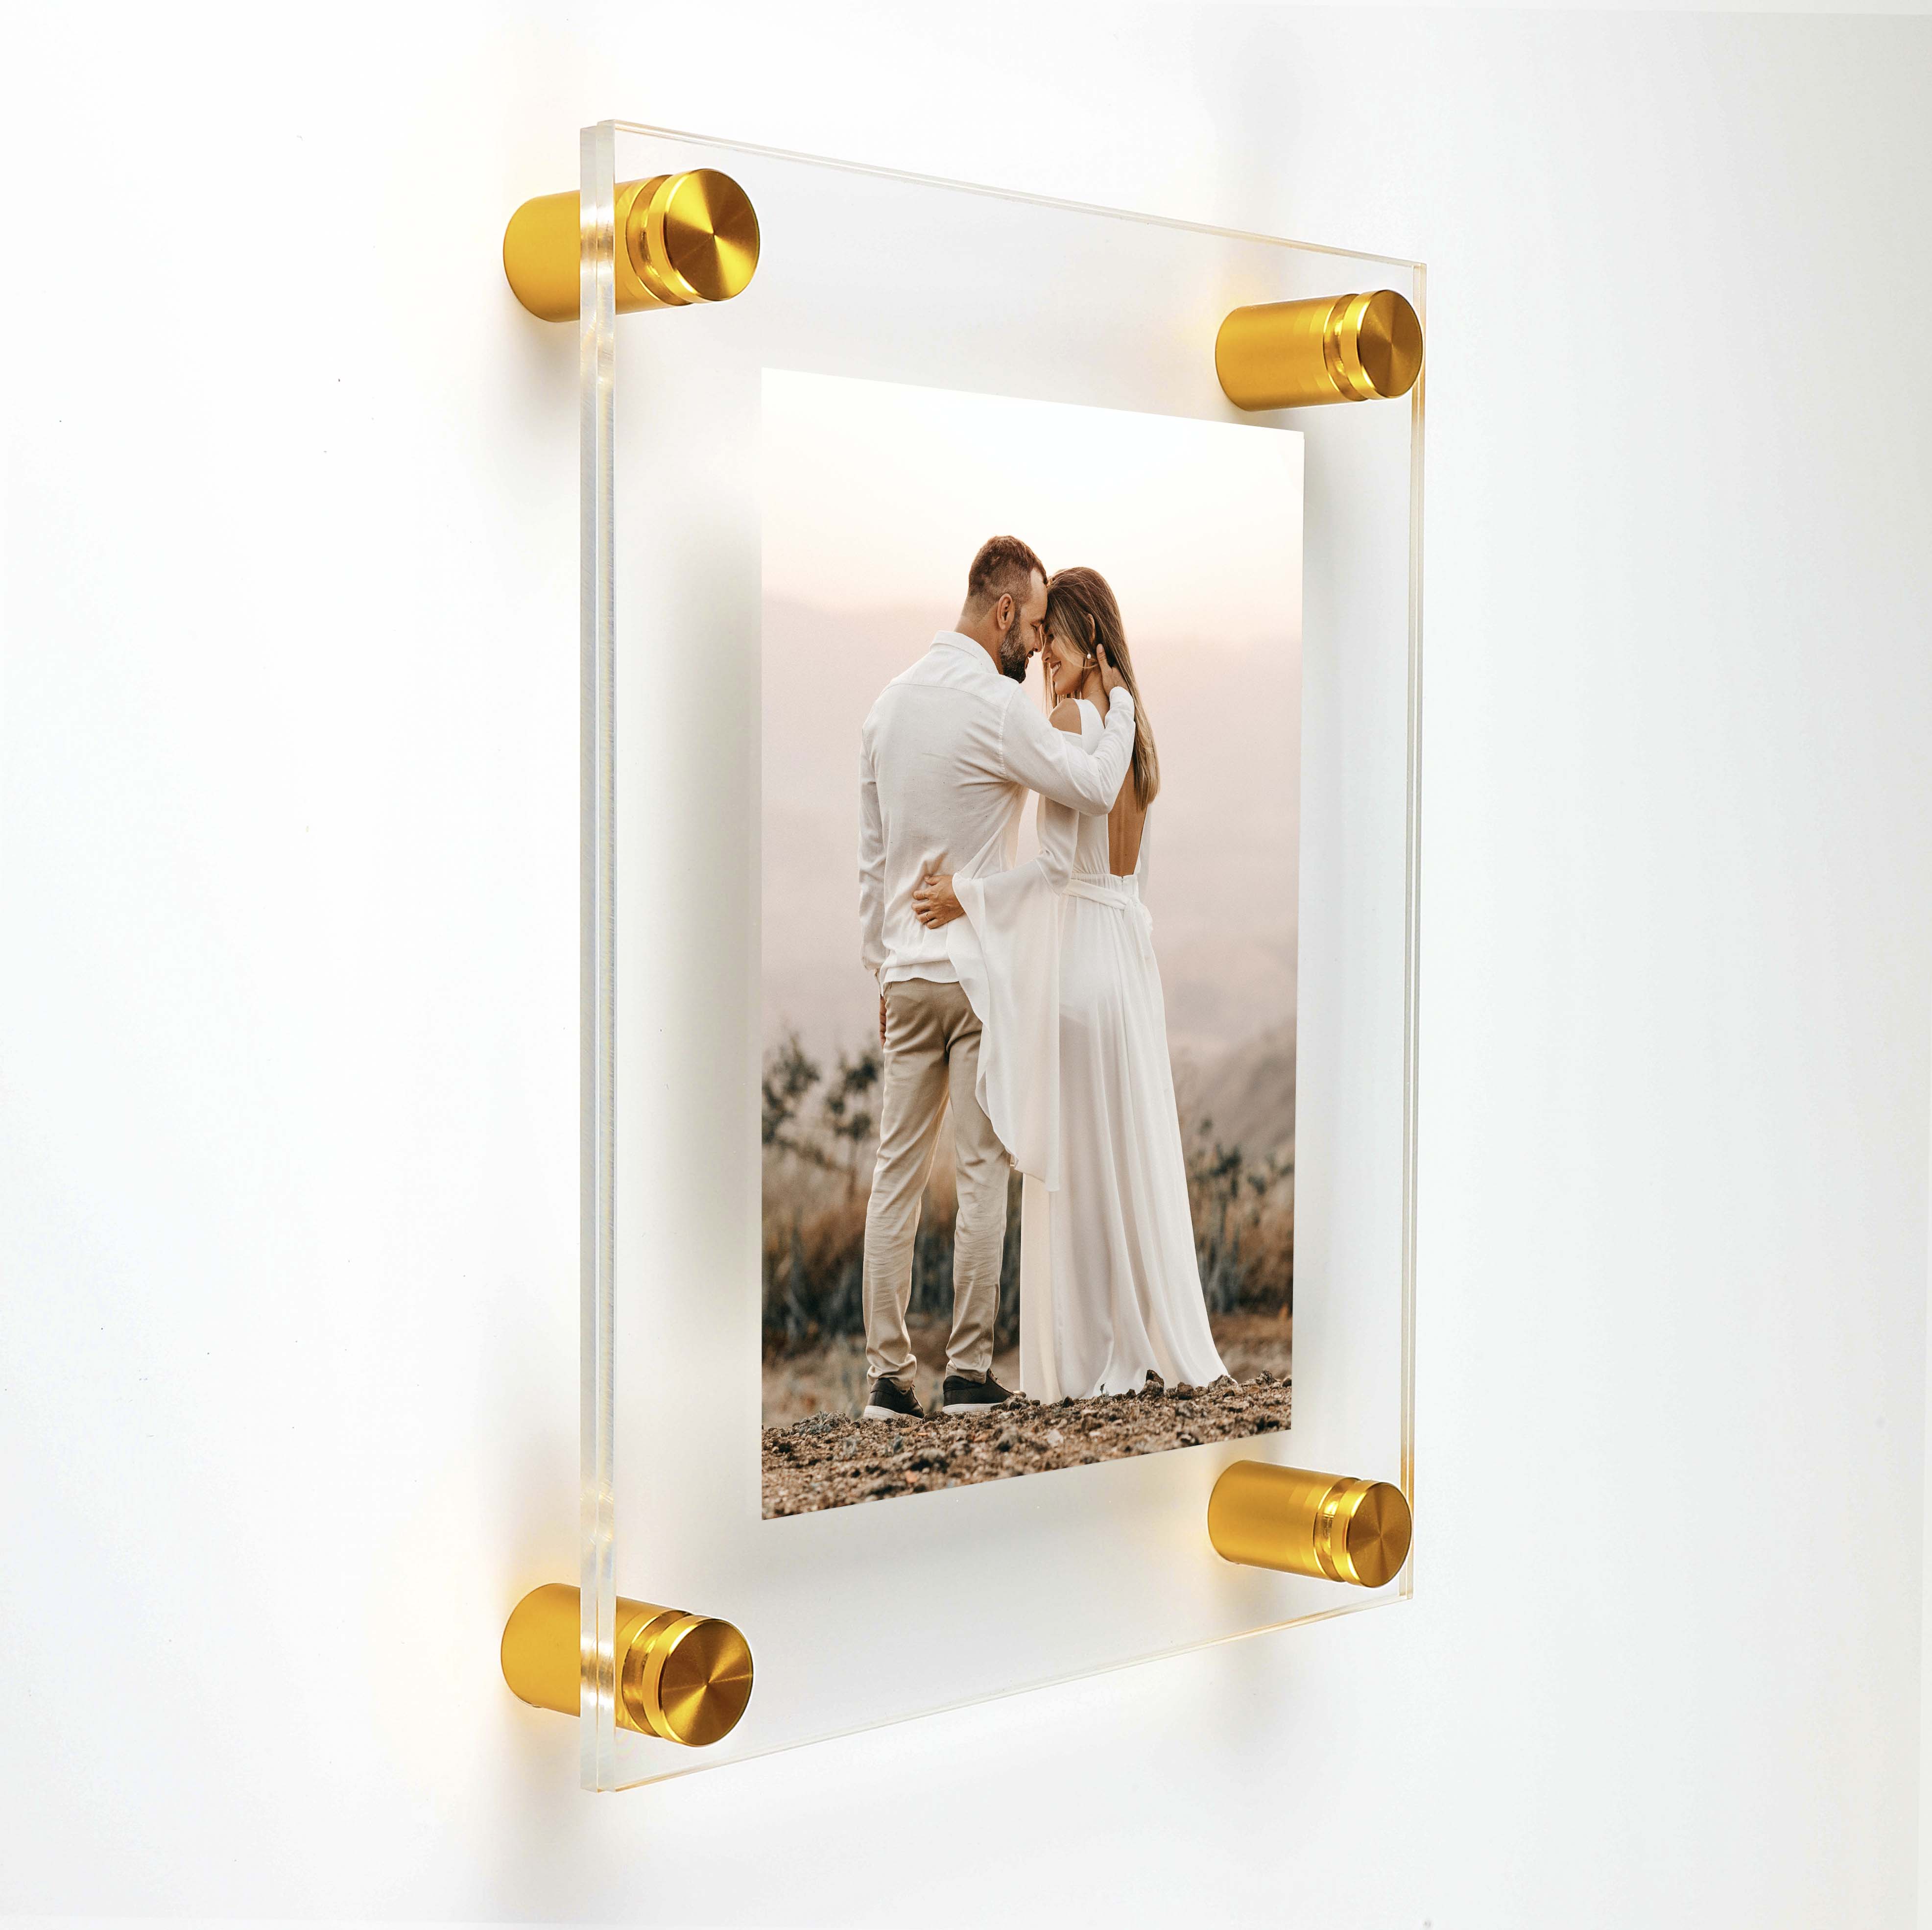 (2) 23-3/4'' x 29-3/4'' Clear Acrylics , Pre-Drilled With Polished Edges (Thick 3/16'' each), Wall Frame with (4) 5/8'' x 1'' Gold Anodized Aluminum Standoffs includes Screws and Anchors